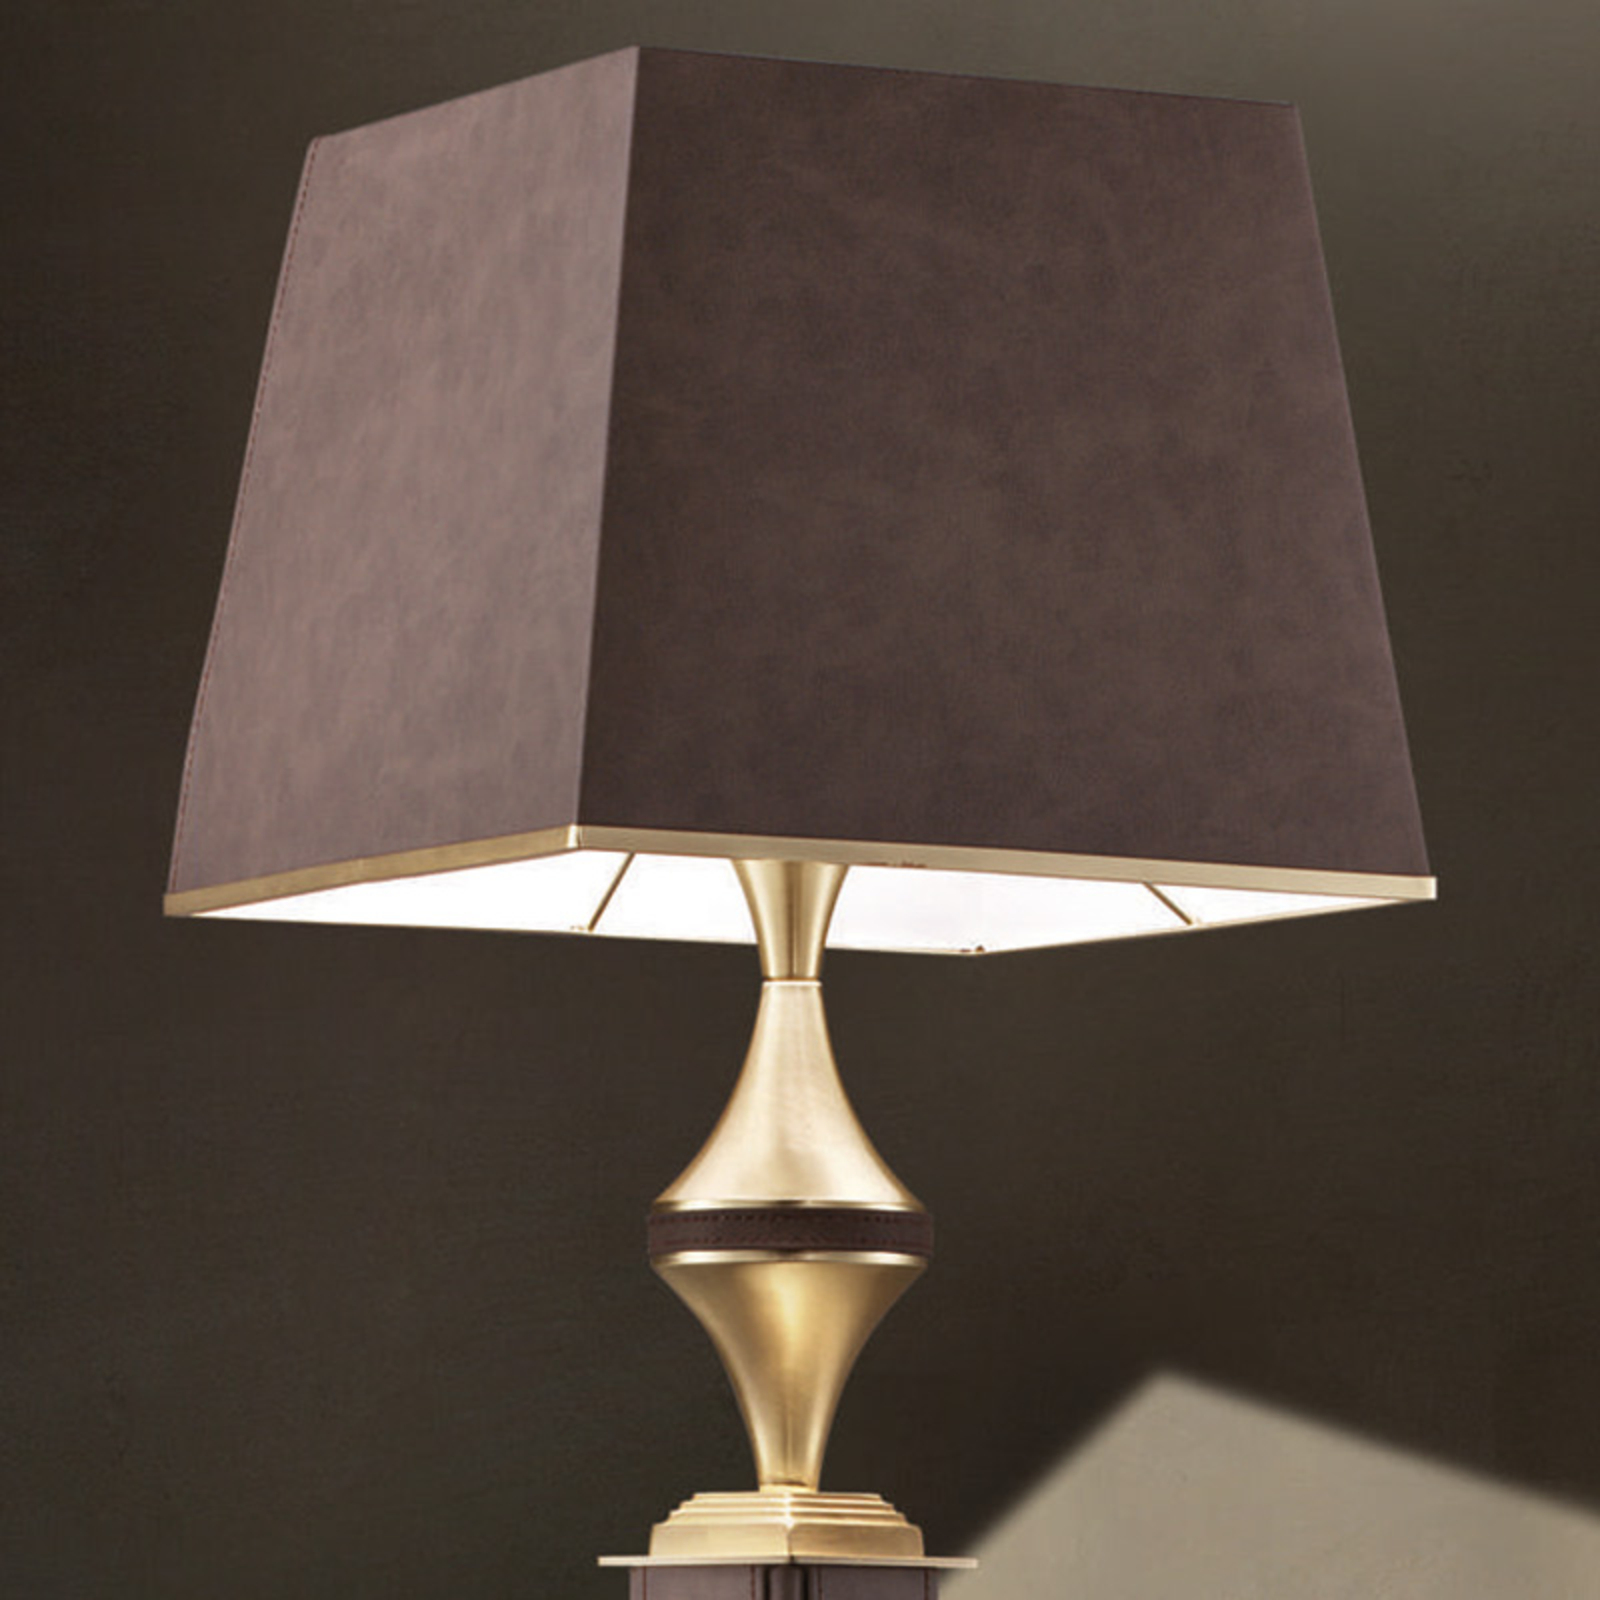 Darshan floor lamp with a brown leather cover